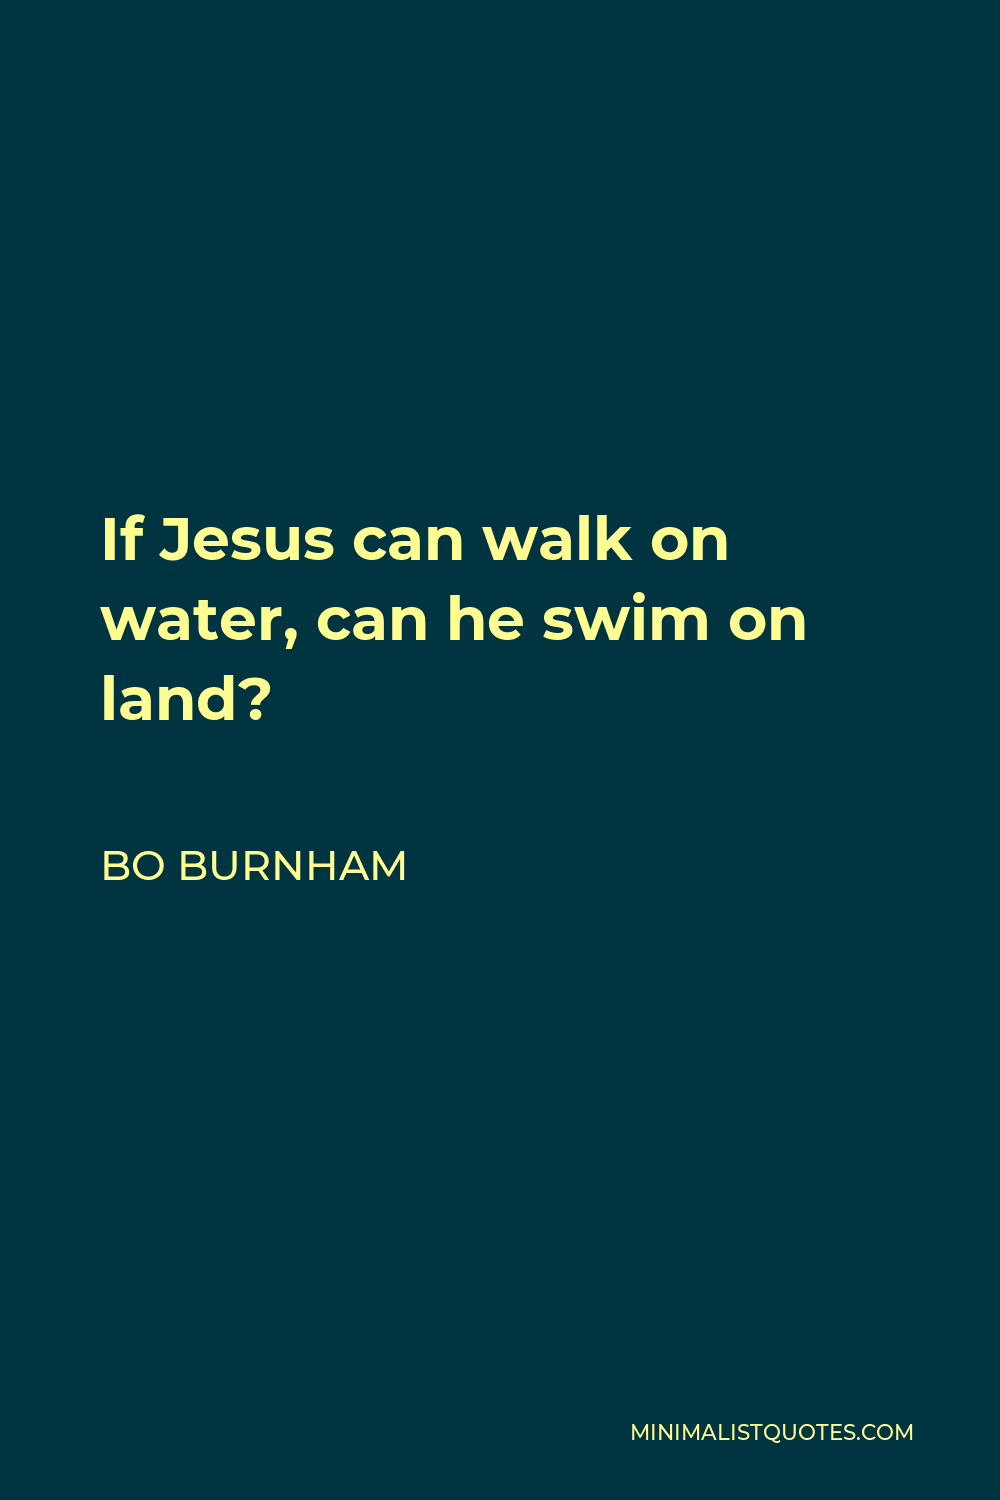 Bo Burnham Quote - If Jesus can walk on water, can he swim on land?